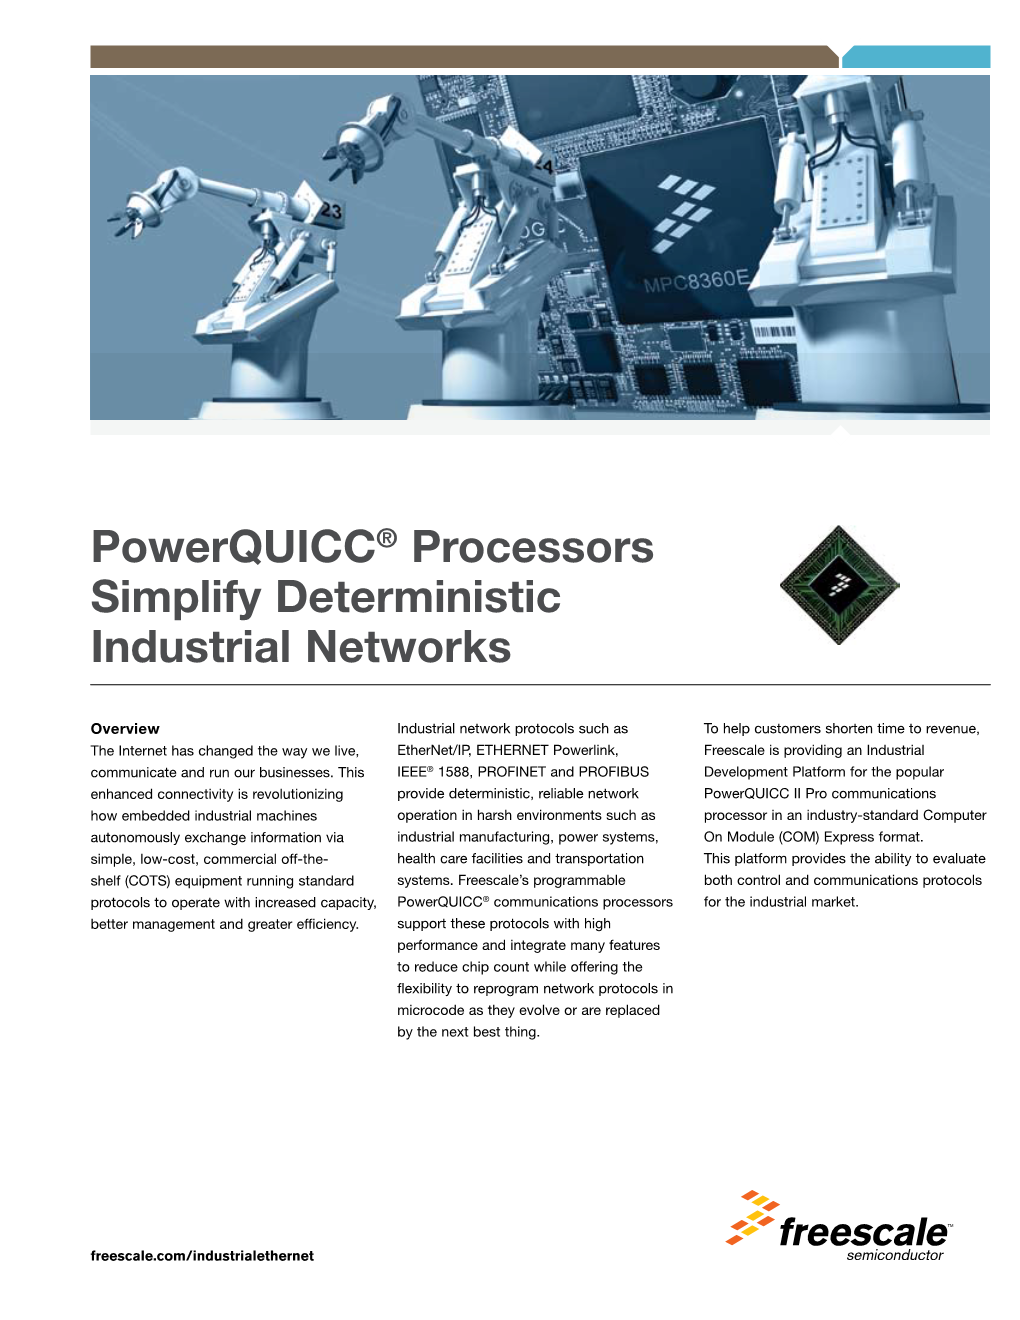 Powerquicc® Processors Simplify Deterministic Industrial Networks